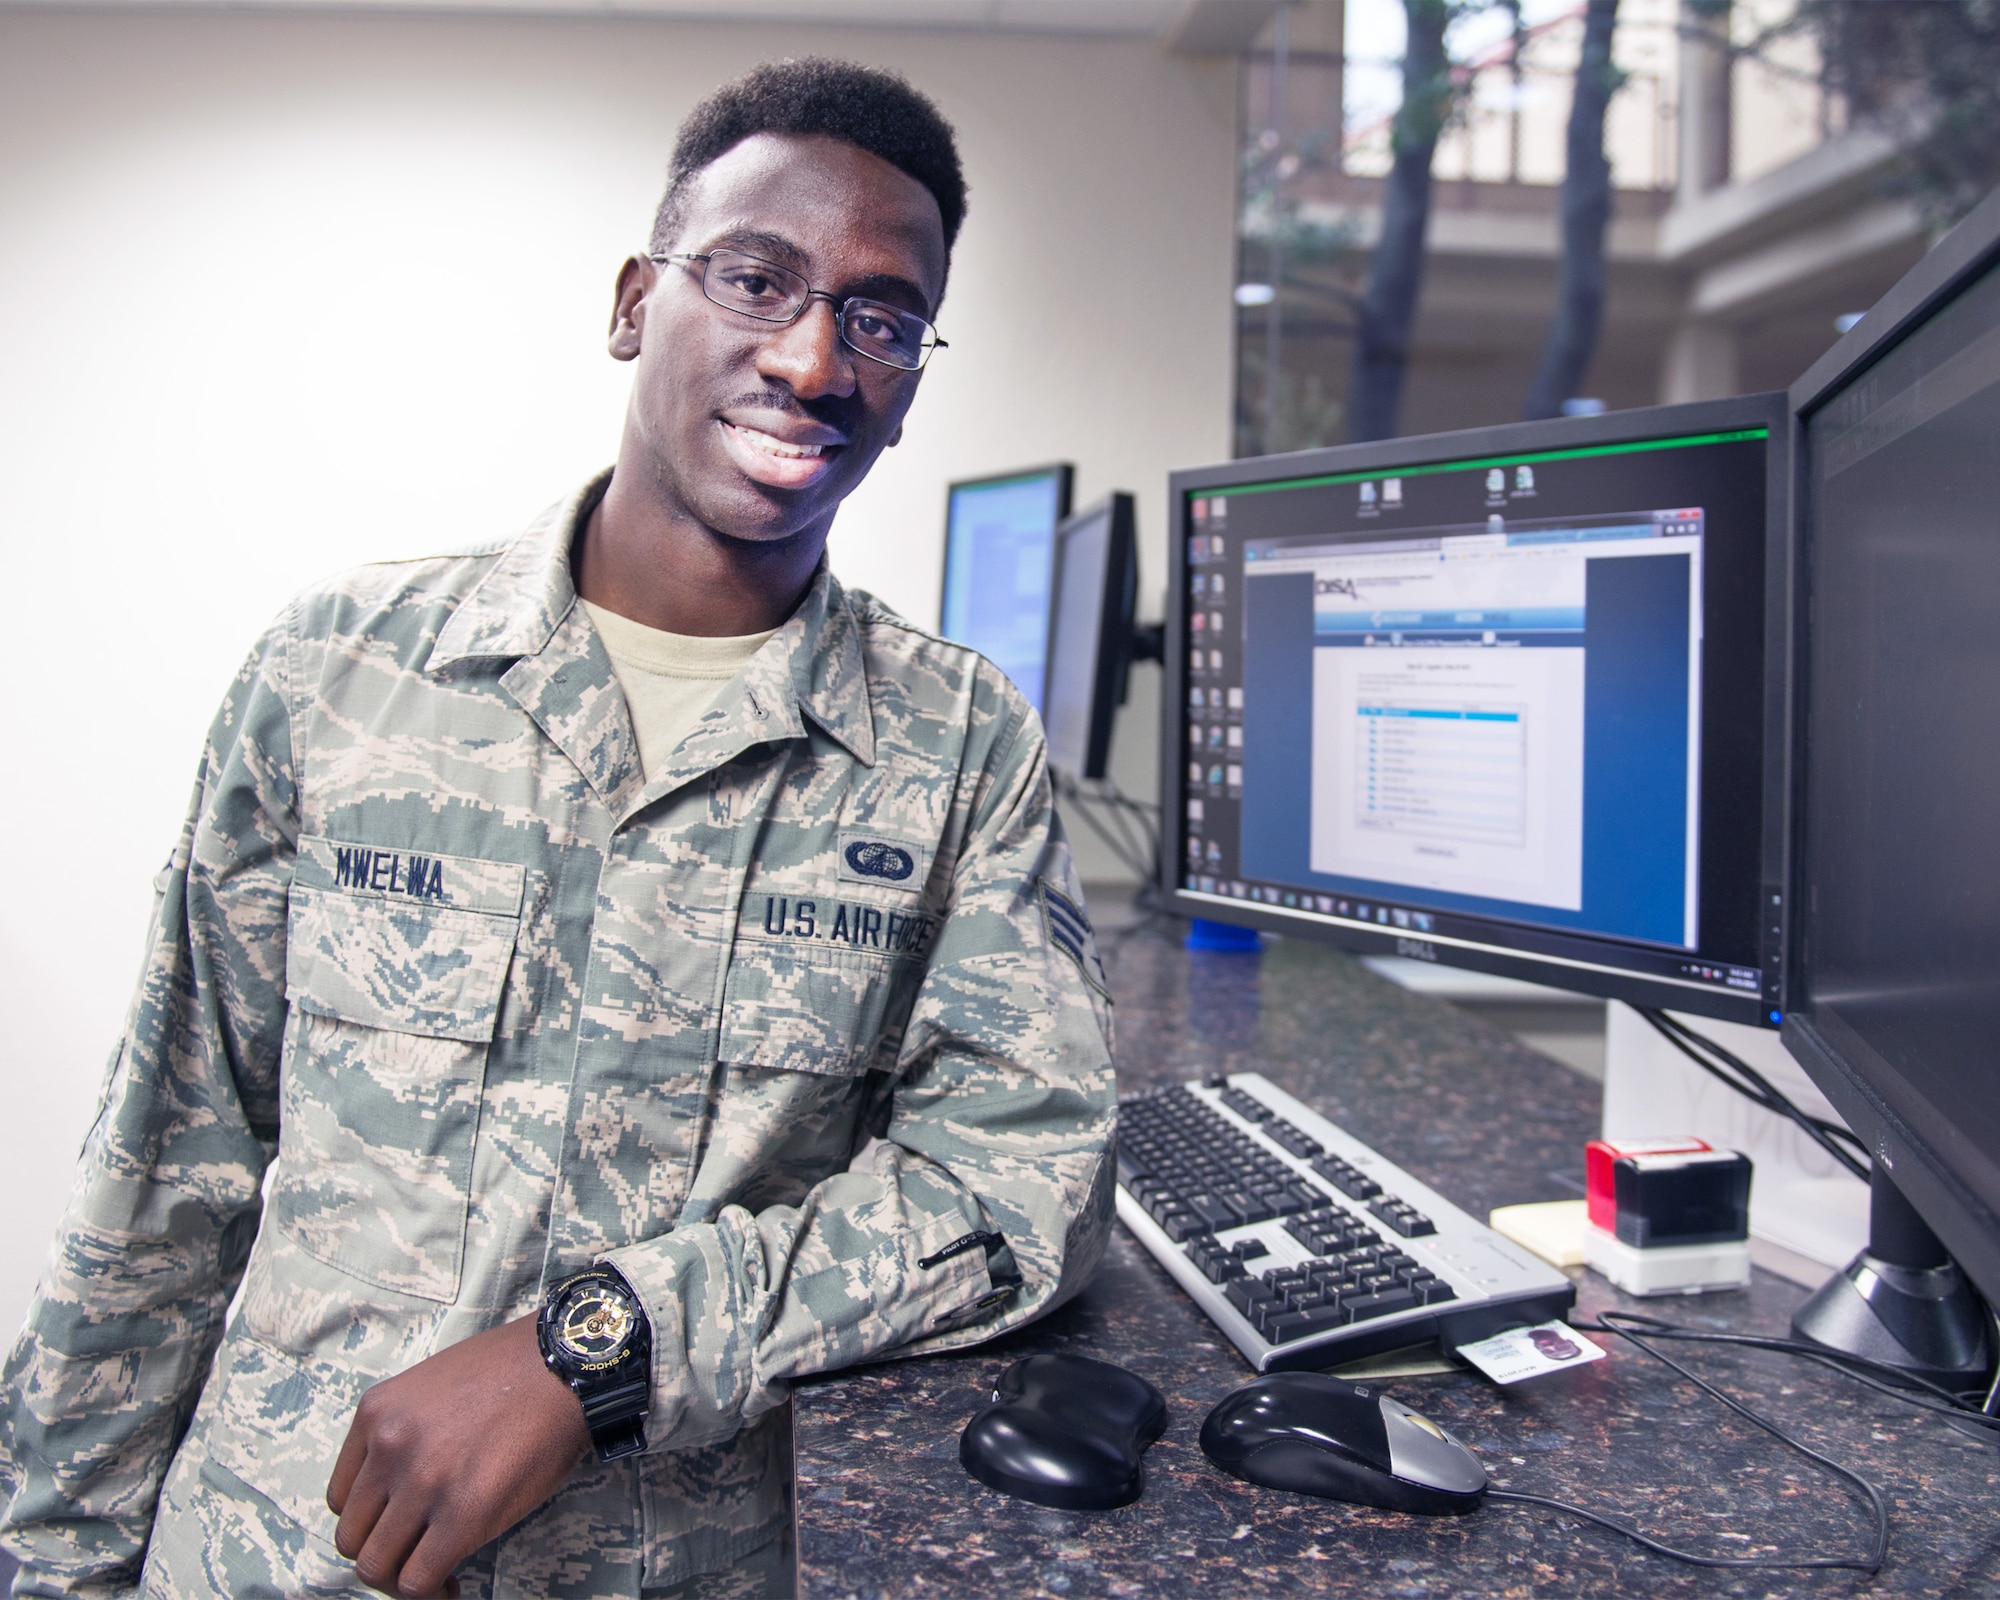 Senior Airman Michael Mwelwa, of the 60th Comptroller Squadron, stands by his workstation at Travis Air Force Base, Calif., Oct. 25, 2016. Mwelwa was recently awarded U.S. citizenship after coming to the United States at the age five from Zambia. (U.S. Air Force photo/Louis Briscese)